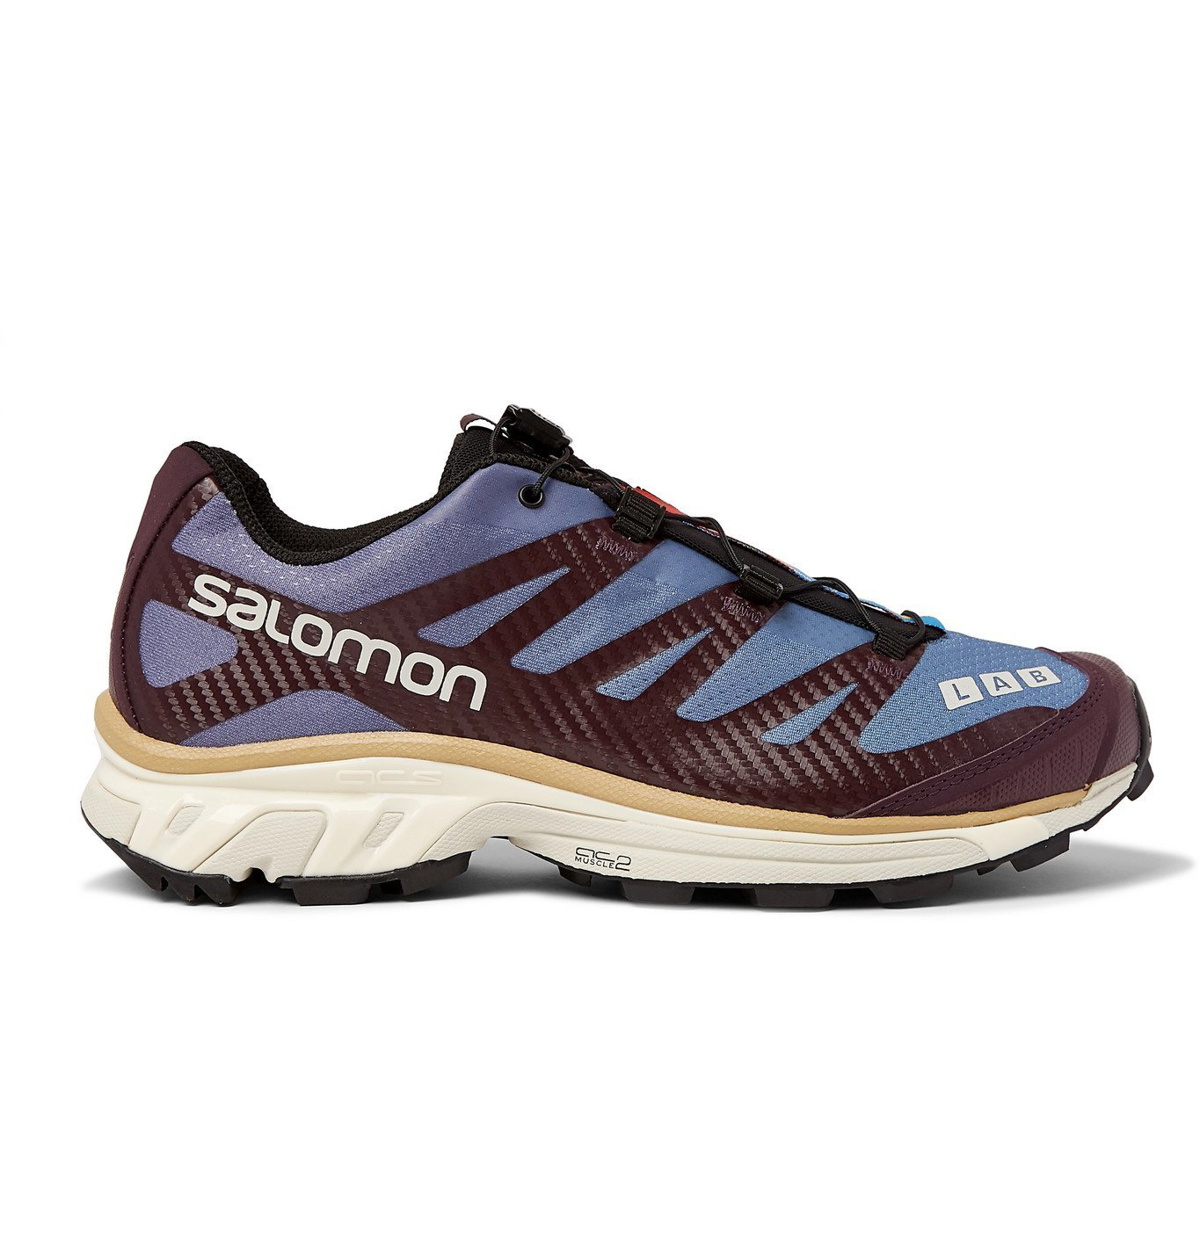 XT-4 Advanced Rubber-Trimmed Coated-Mesh Running Sneakers - Salomon